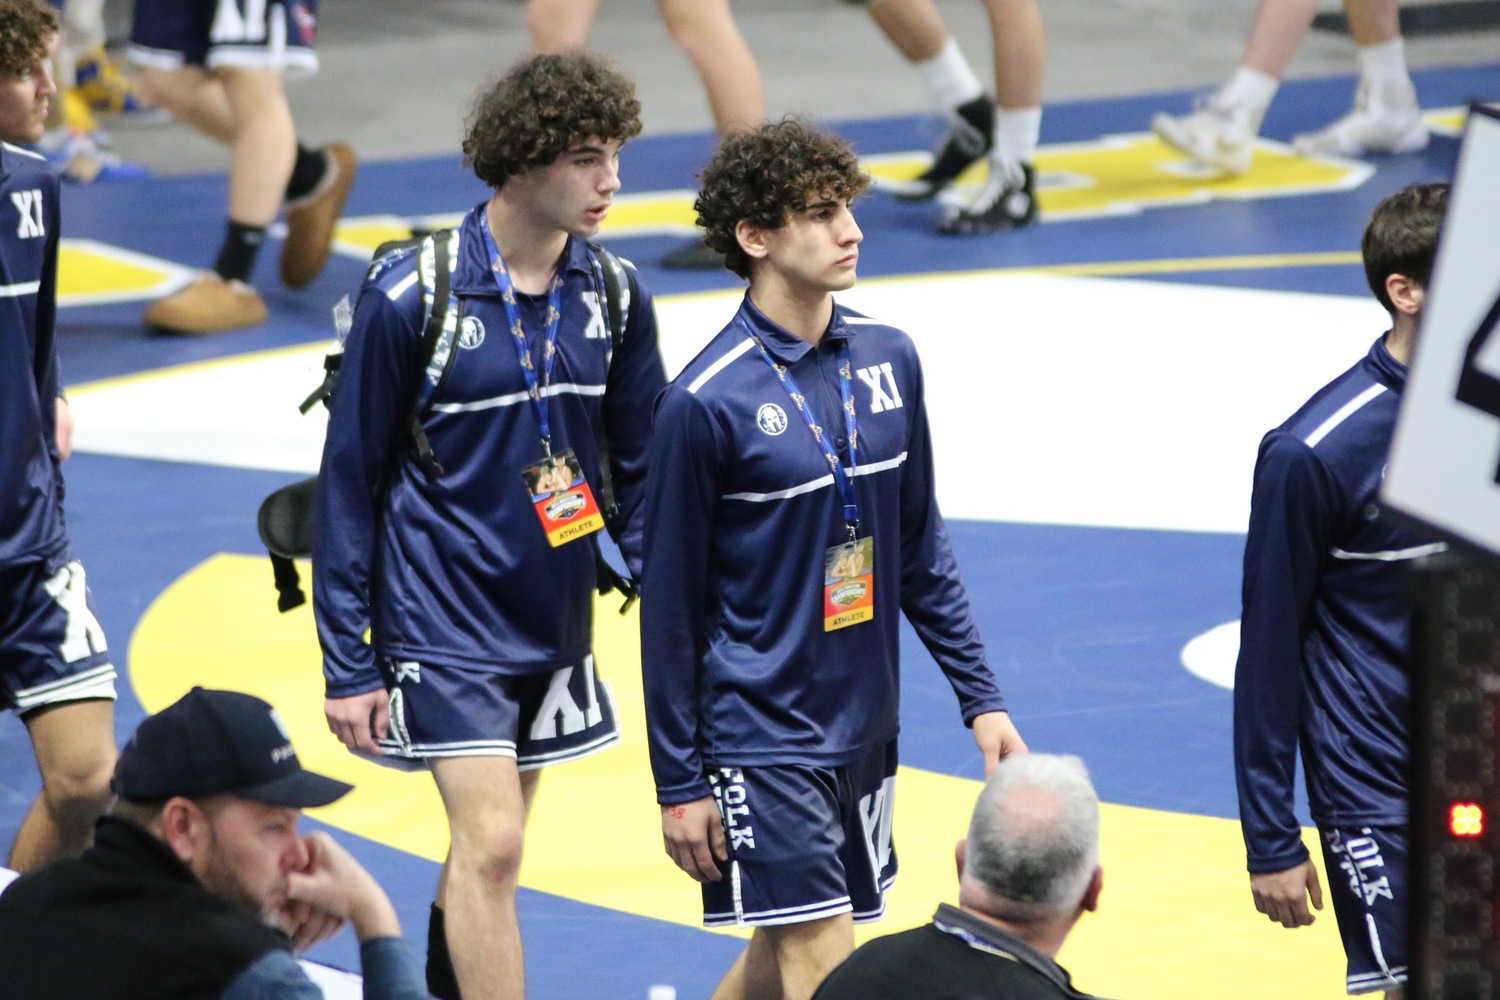 Mariners Liam Squires, left, and Jack Nastri as part of the parade of champions at the start of the state tournament this past weekend.   ERIC NASTRI